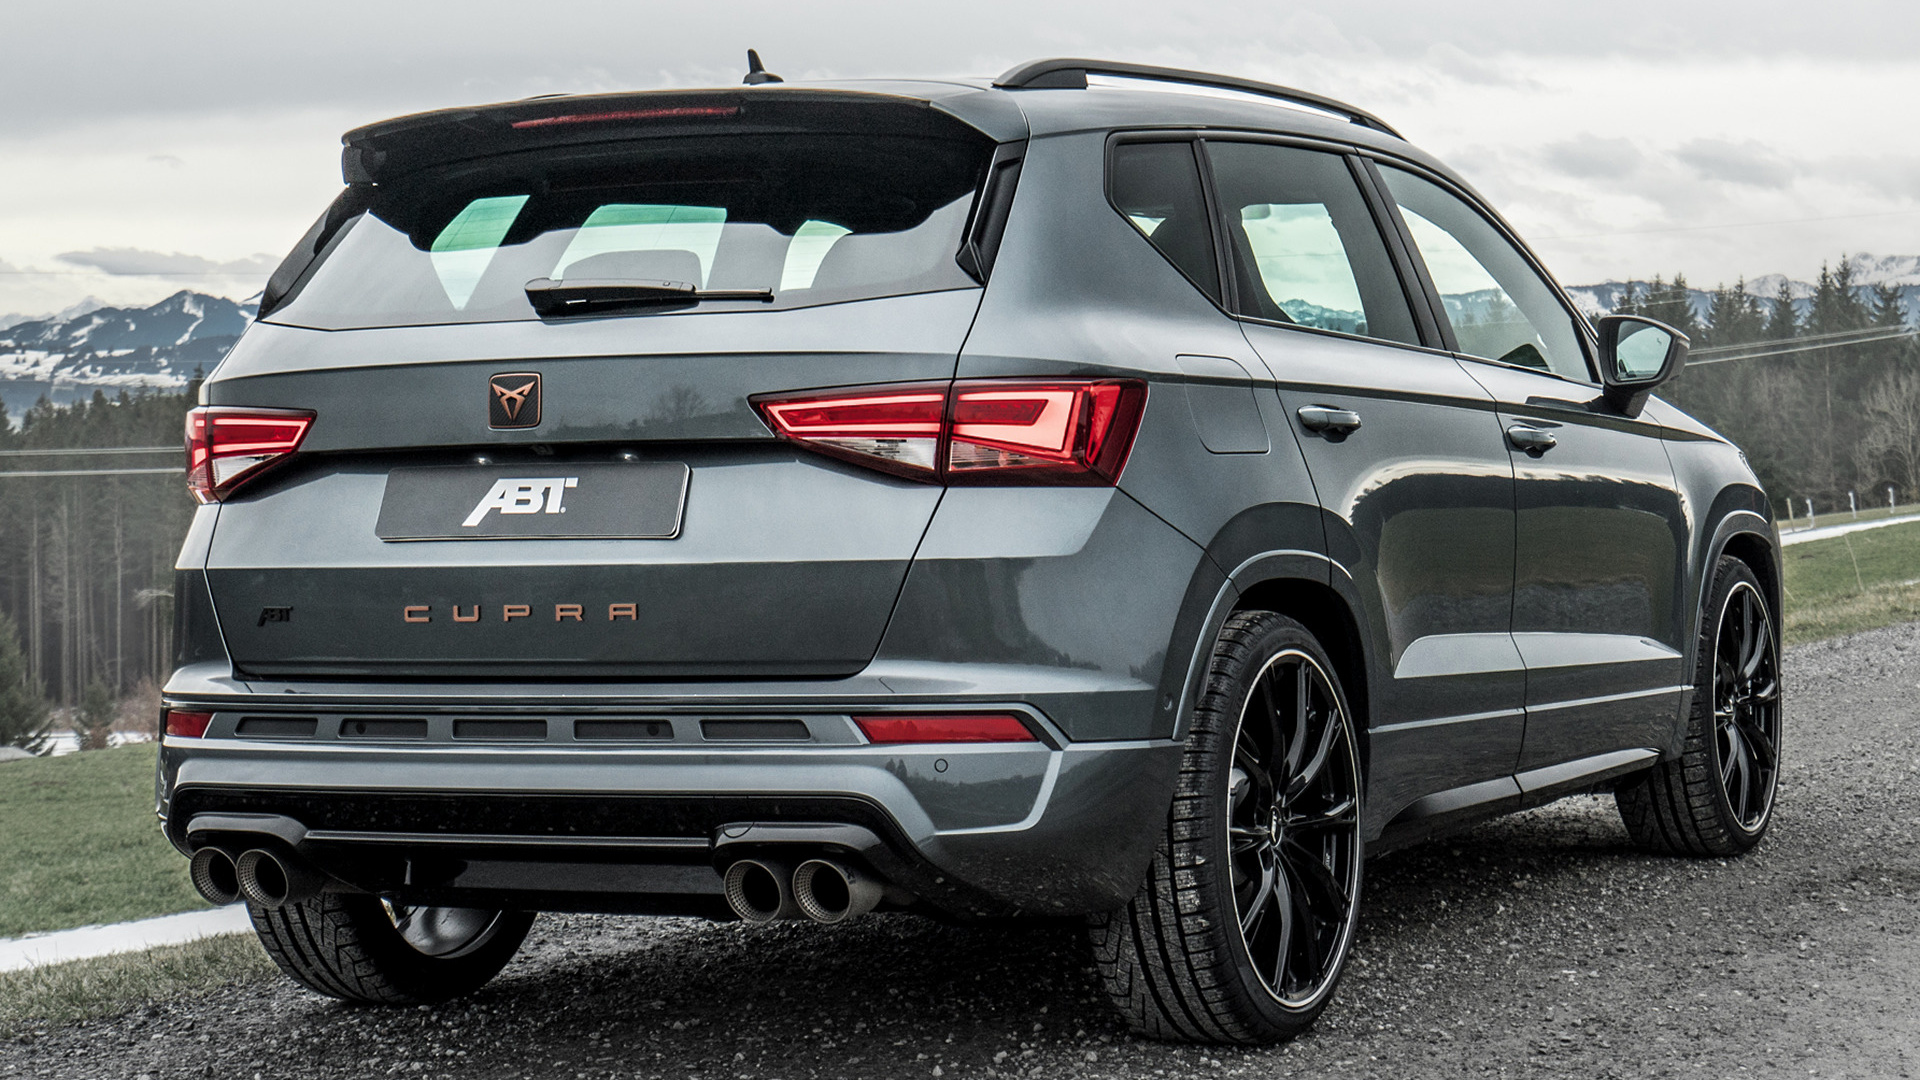 2020 Cupra Ateca Limited Edition by ABT - Wallpapers and HD Images